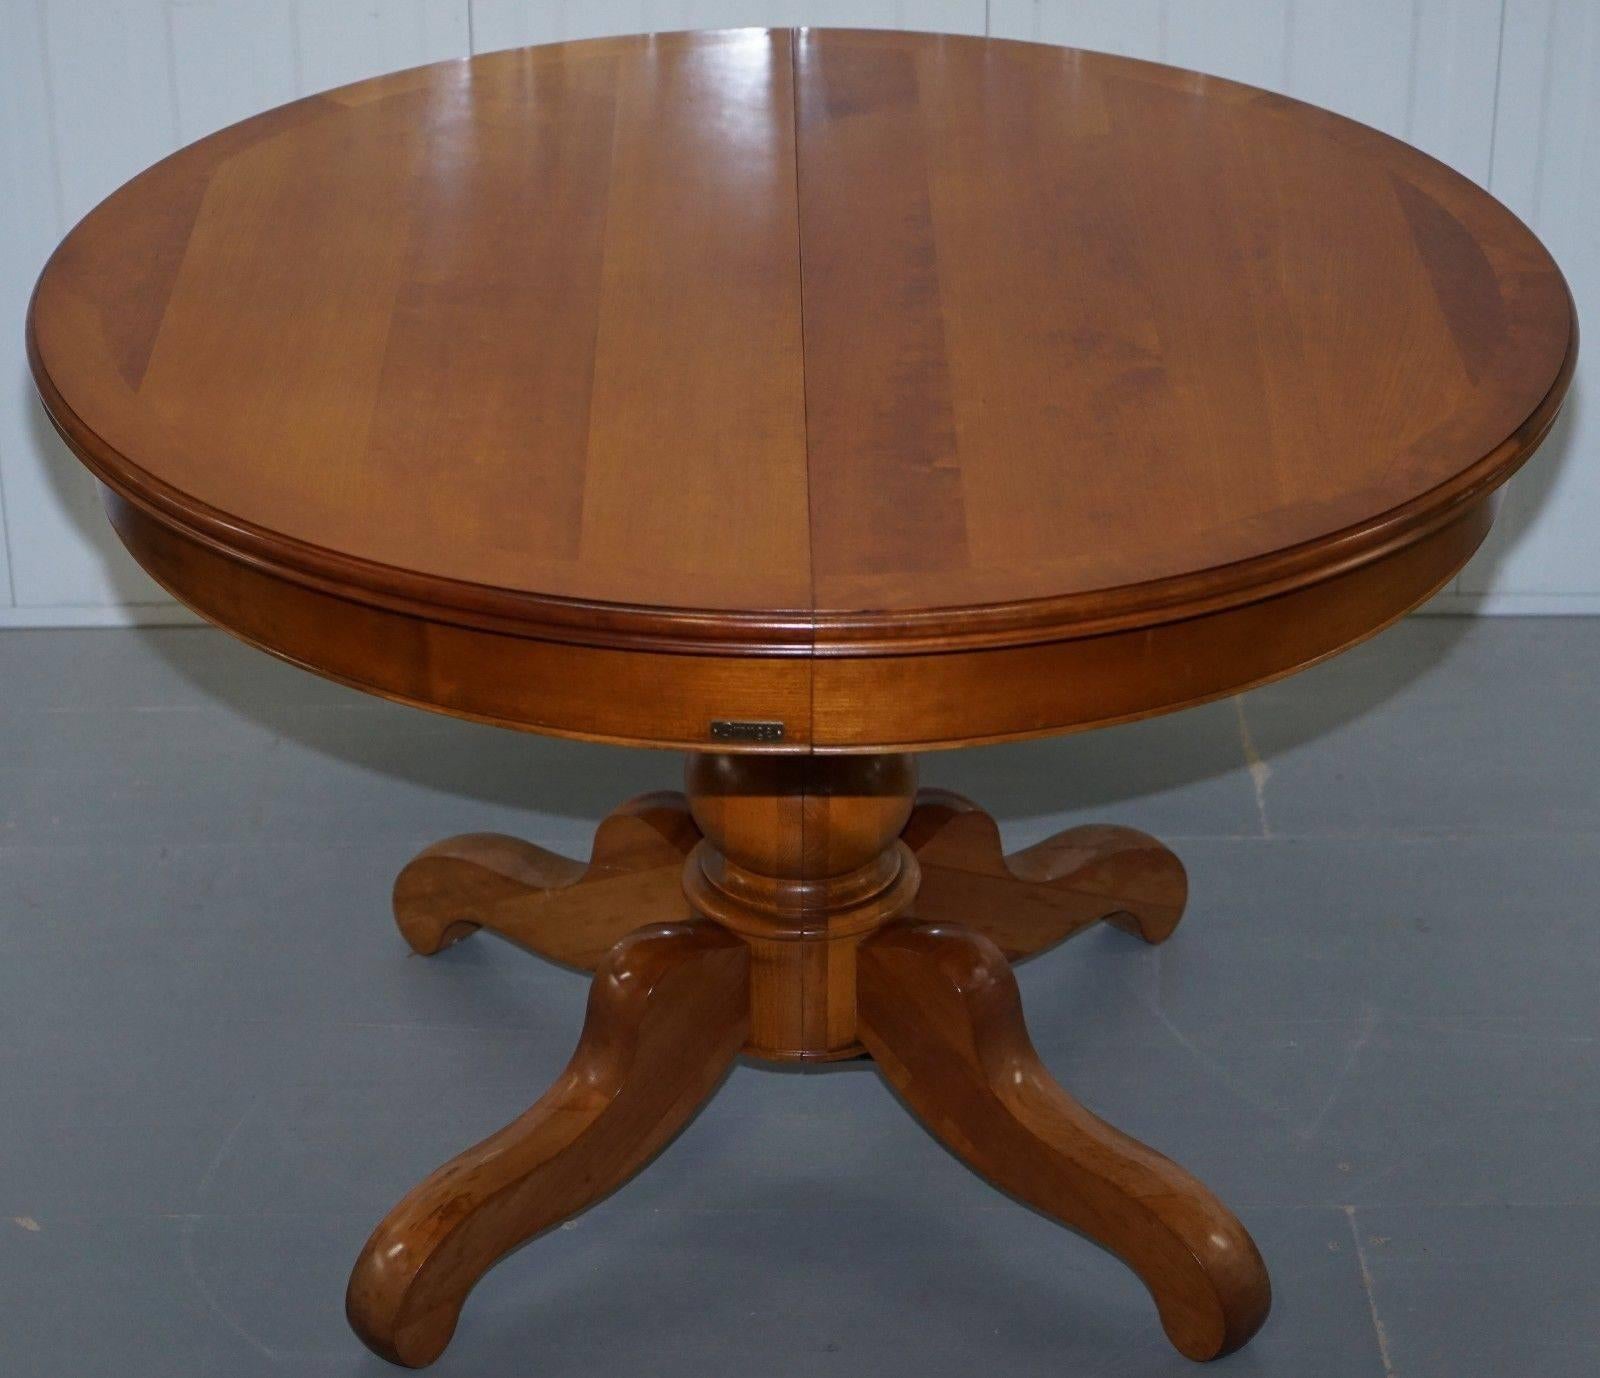 French Provincial Grange Handmade France Cherrywood Extending Dining Table and Six Chairs